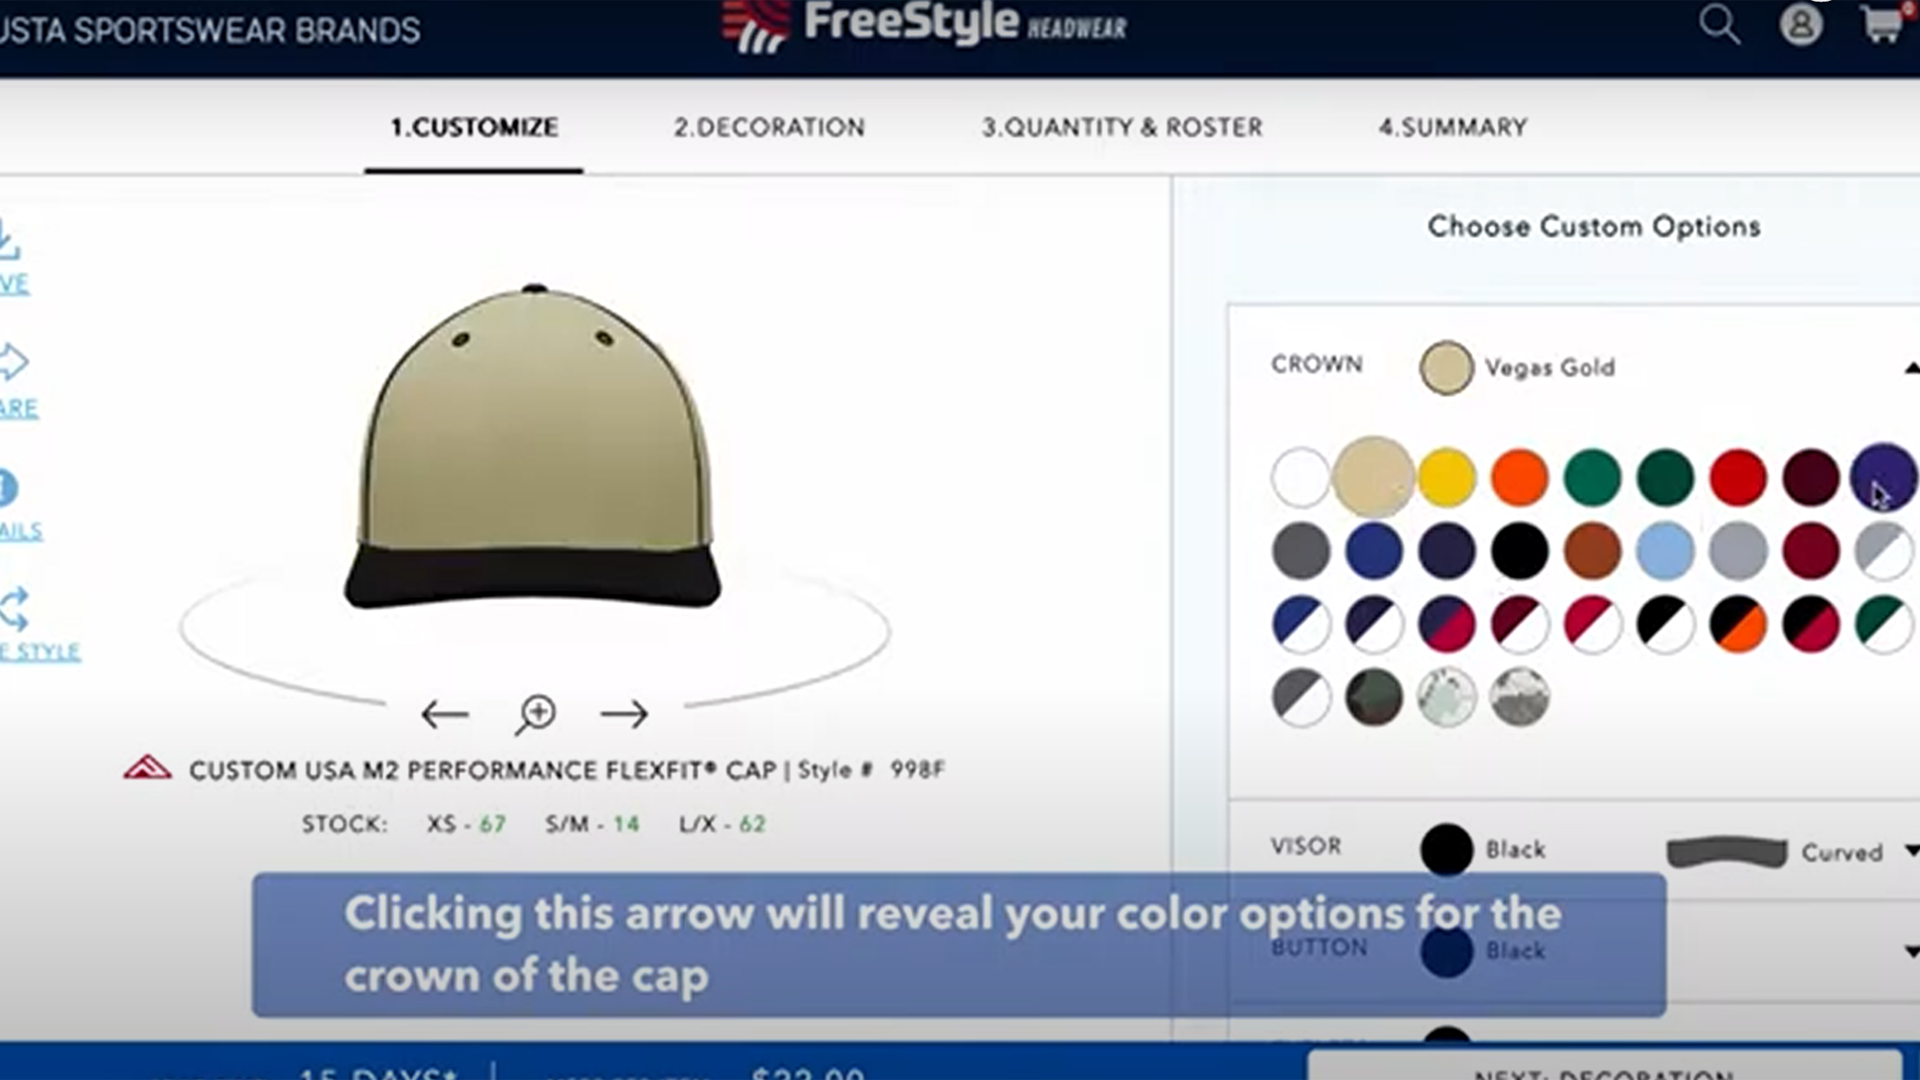 FreeStyle Headwear Video Tutorial Series - Step 1: Color